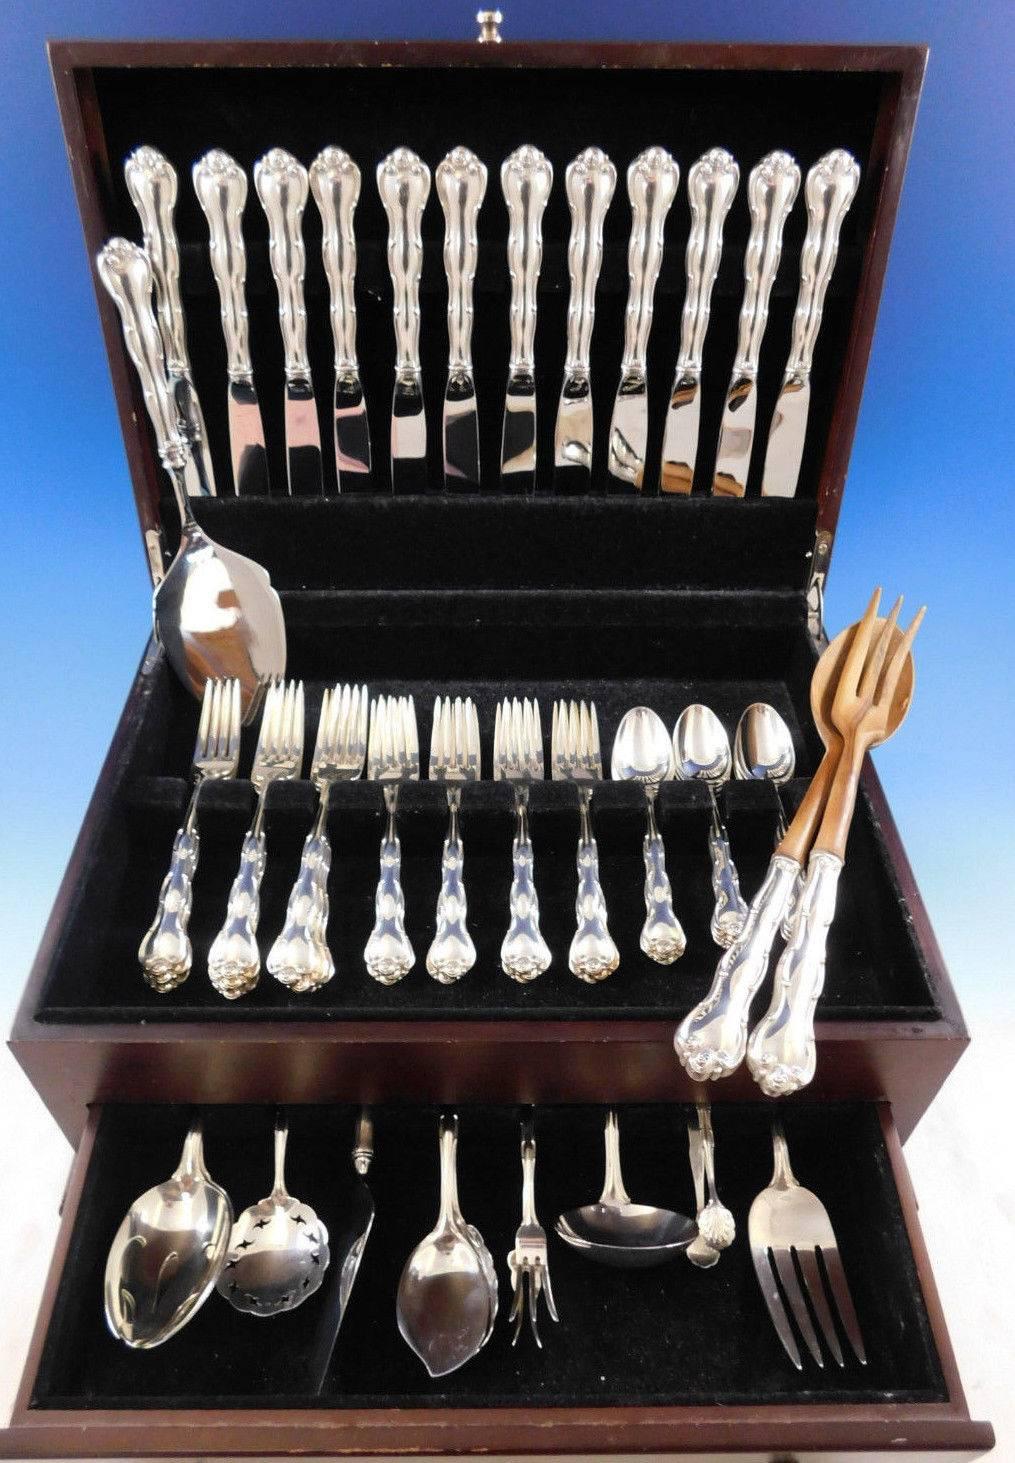 Rondo by Gorham sterling silver Flatware set, 62 pieces. This set includes: 

12 Knives, 8 7/8